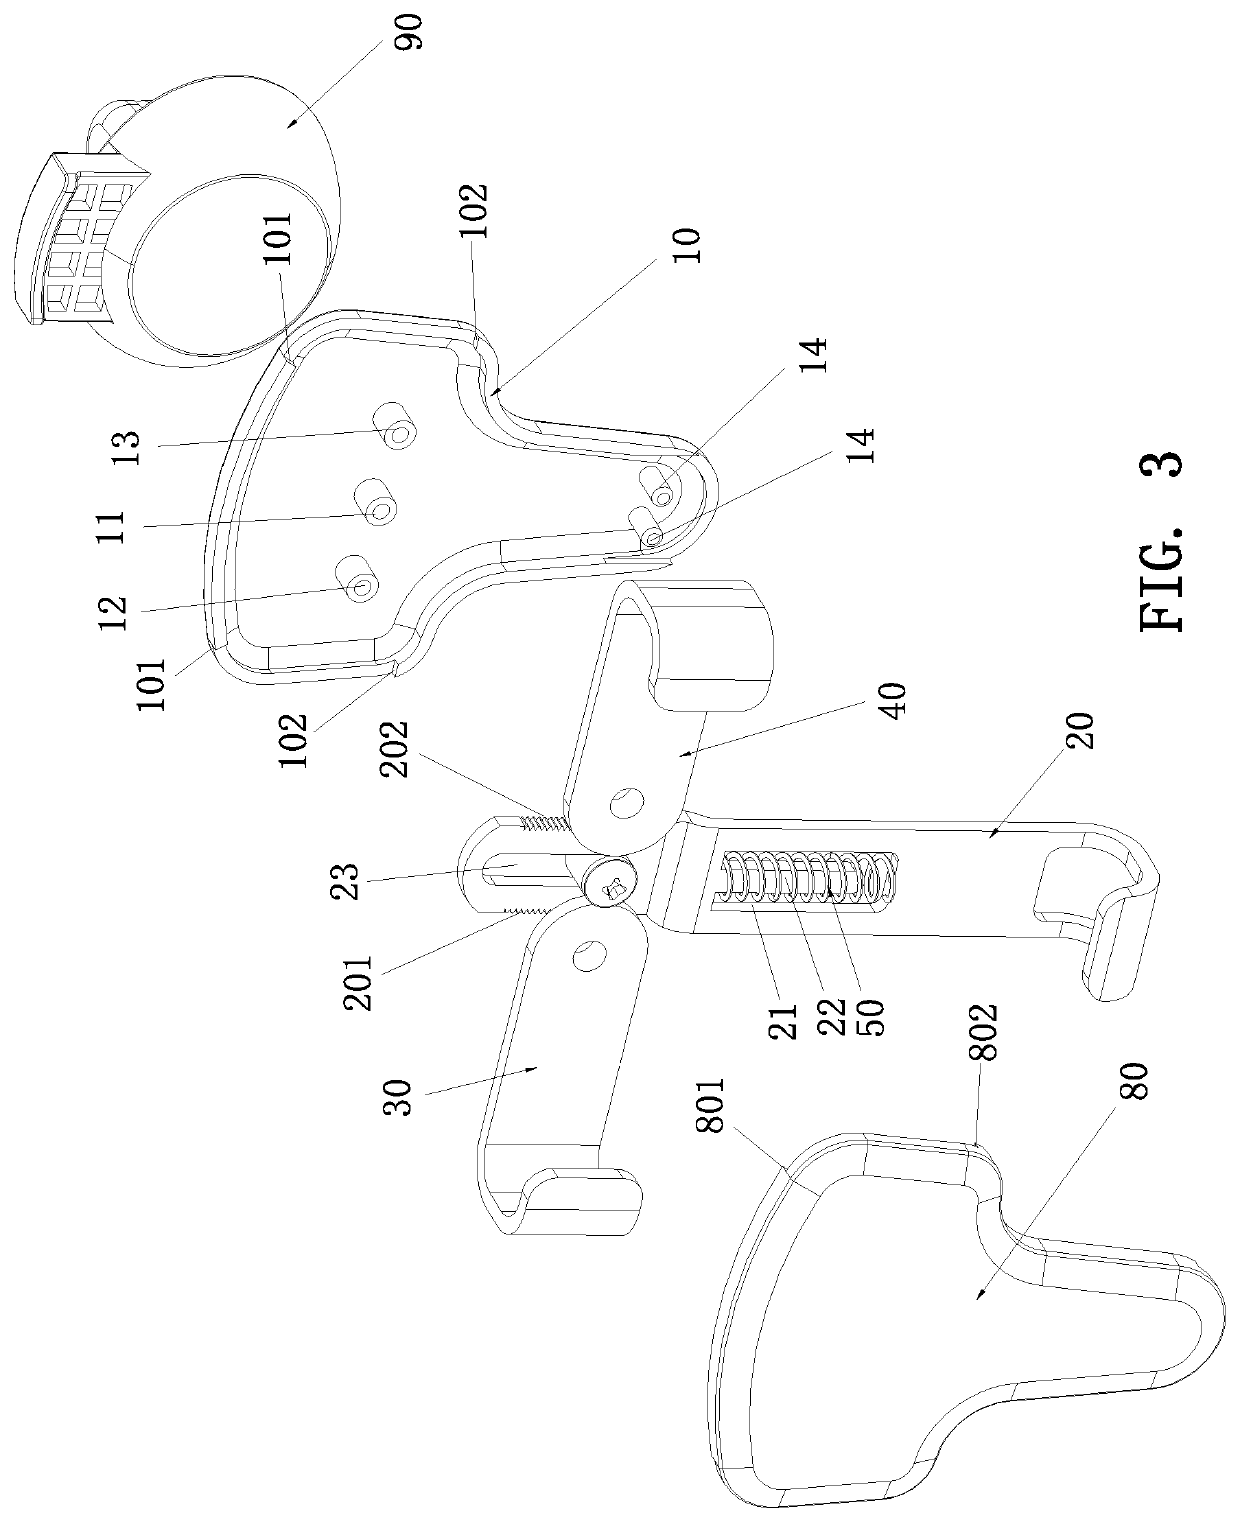 Support capable of fully-automatically performing rotary clamping by means of linkage between gear and rack